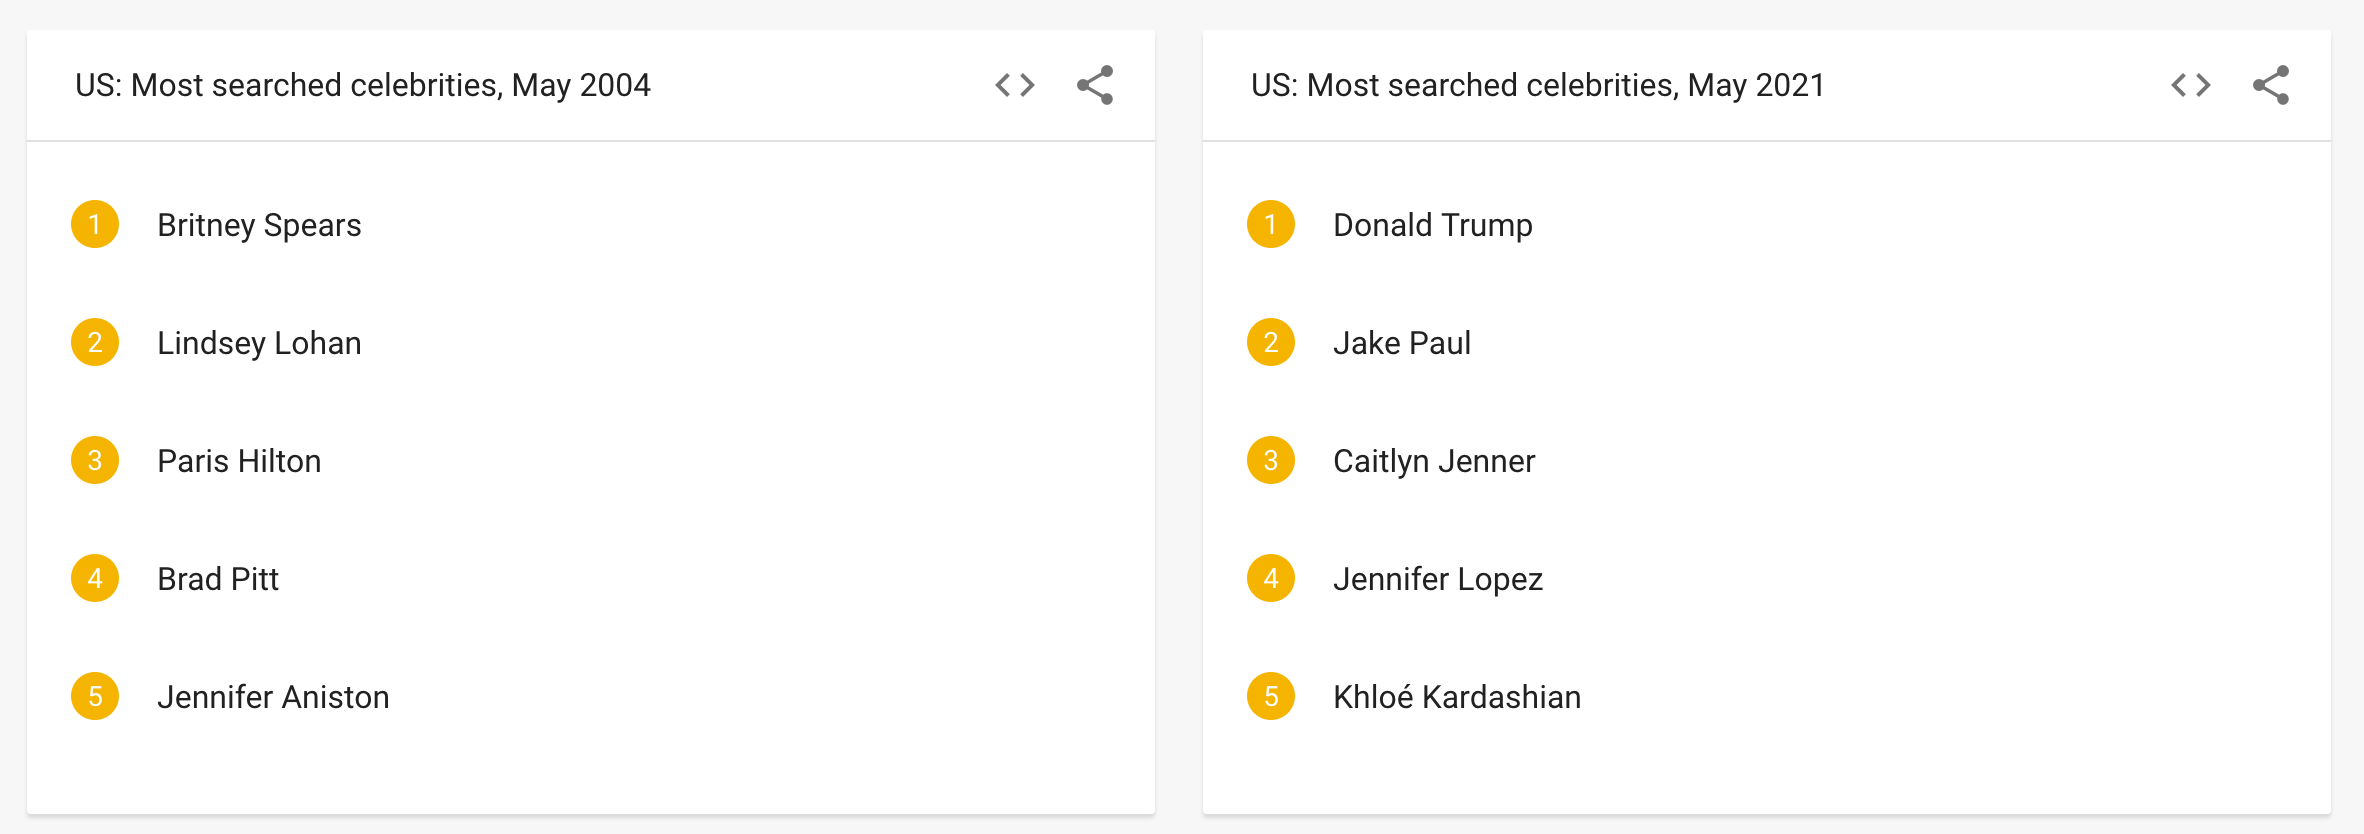 A screenshot of Google Trends' Most Searched Celebrities lists